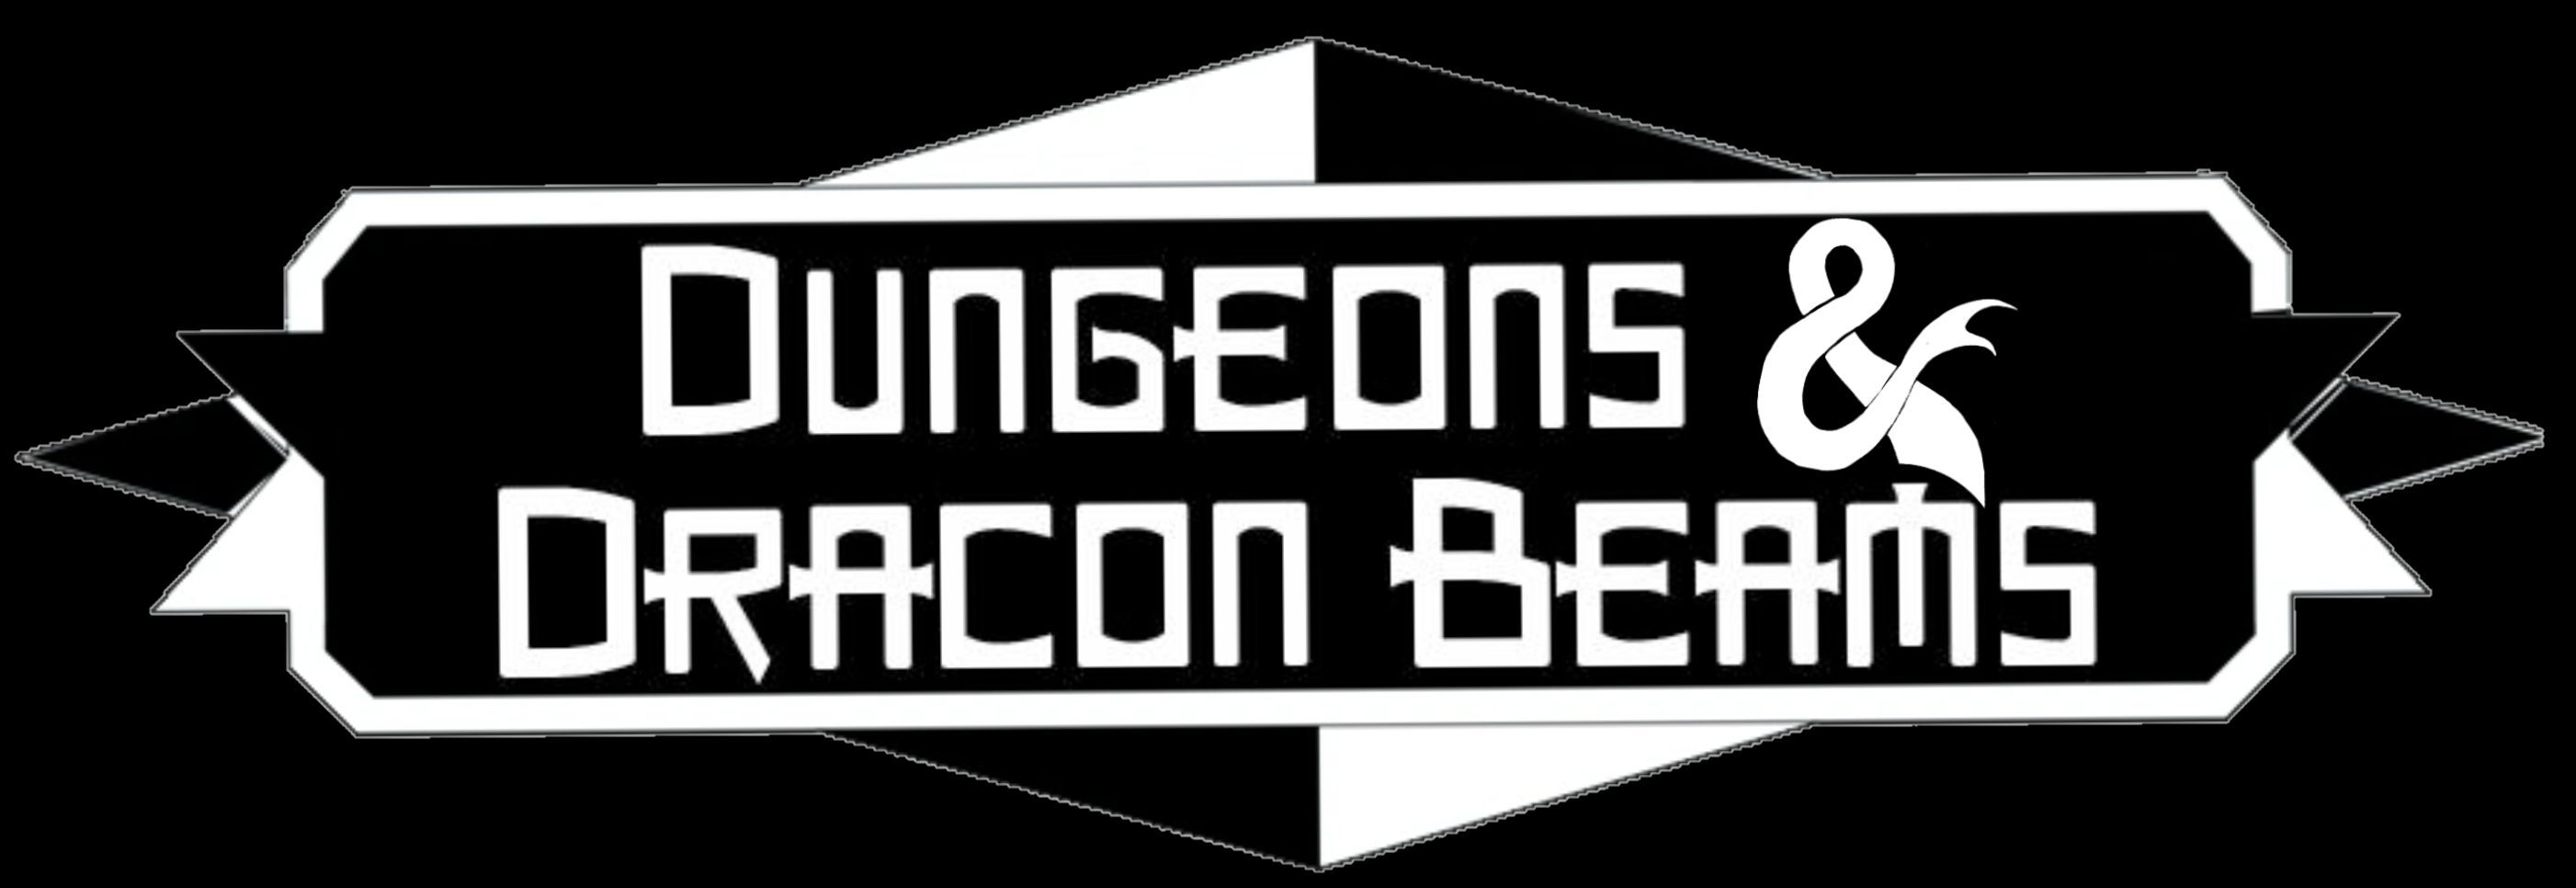 Dungeons and Dracon Beams: An Animorphs AU DnD Adventure